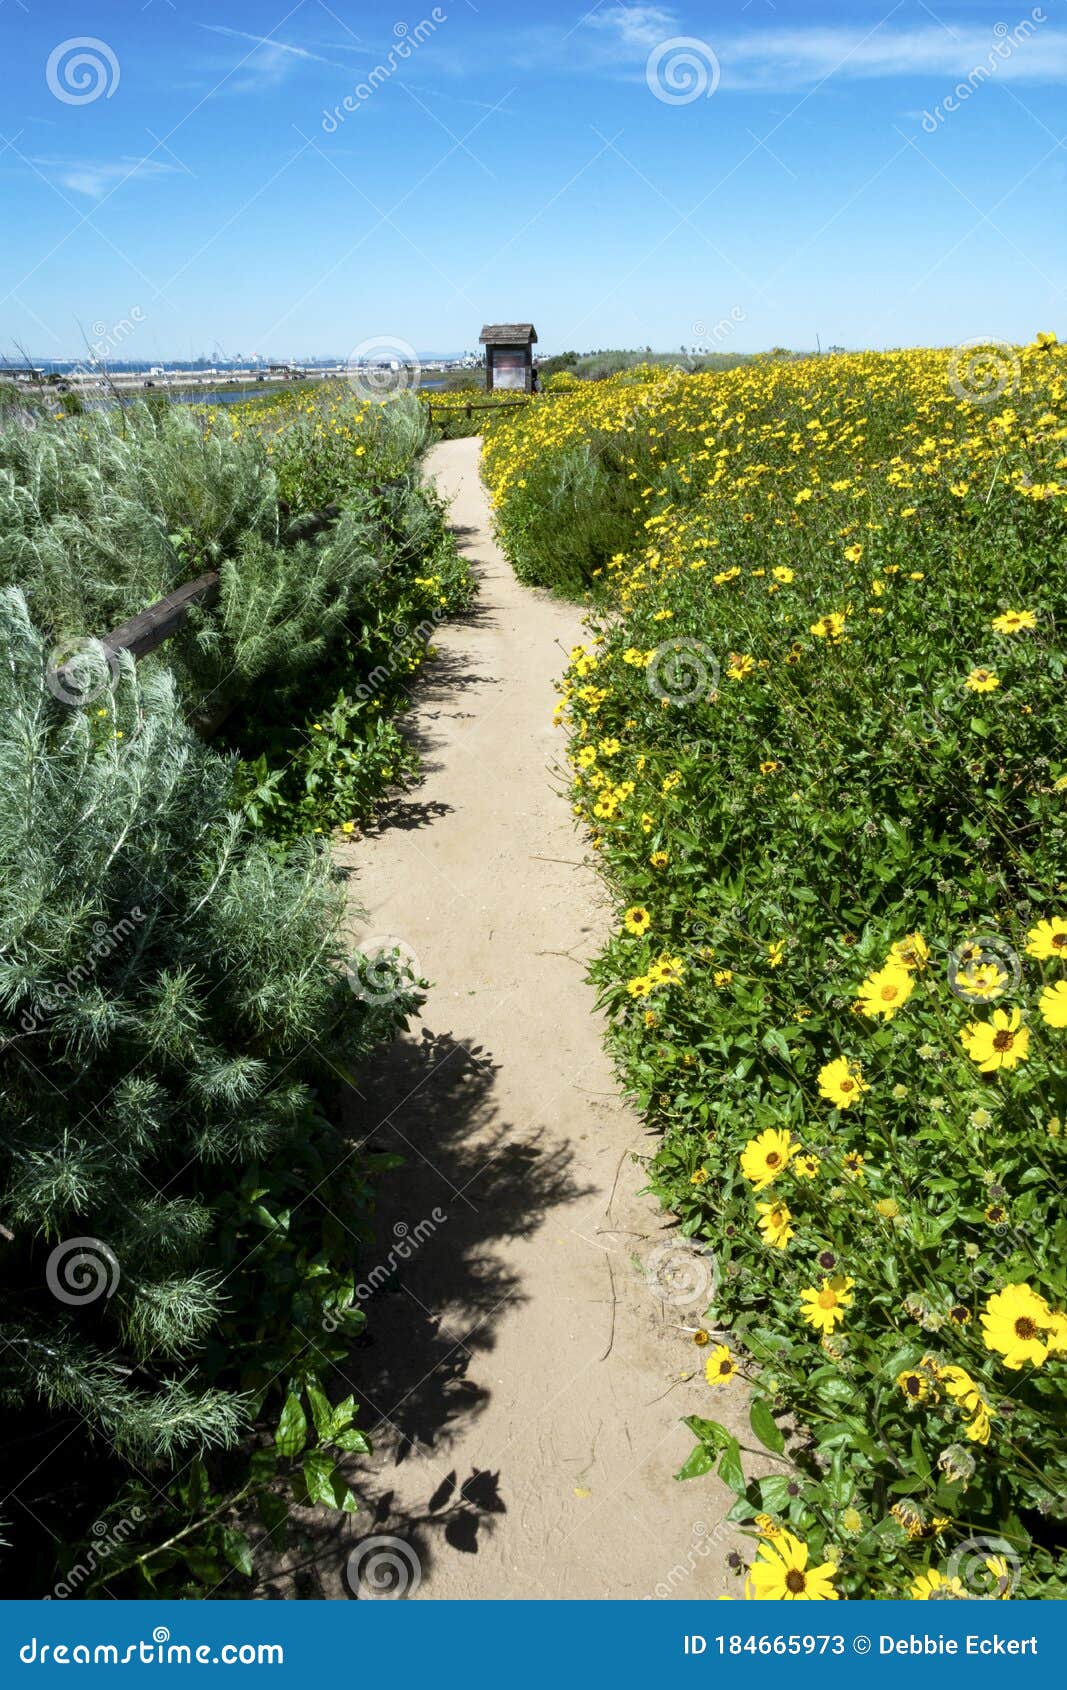 california brittlebush flowers bloom in spring at the bolsa chica wetlands